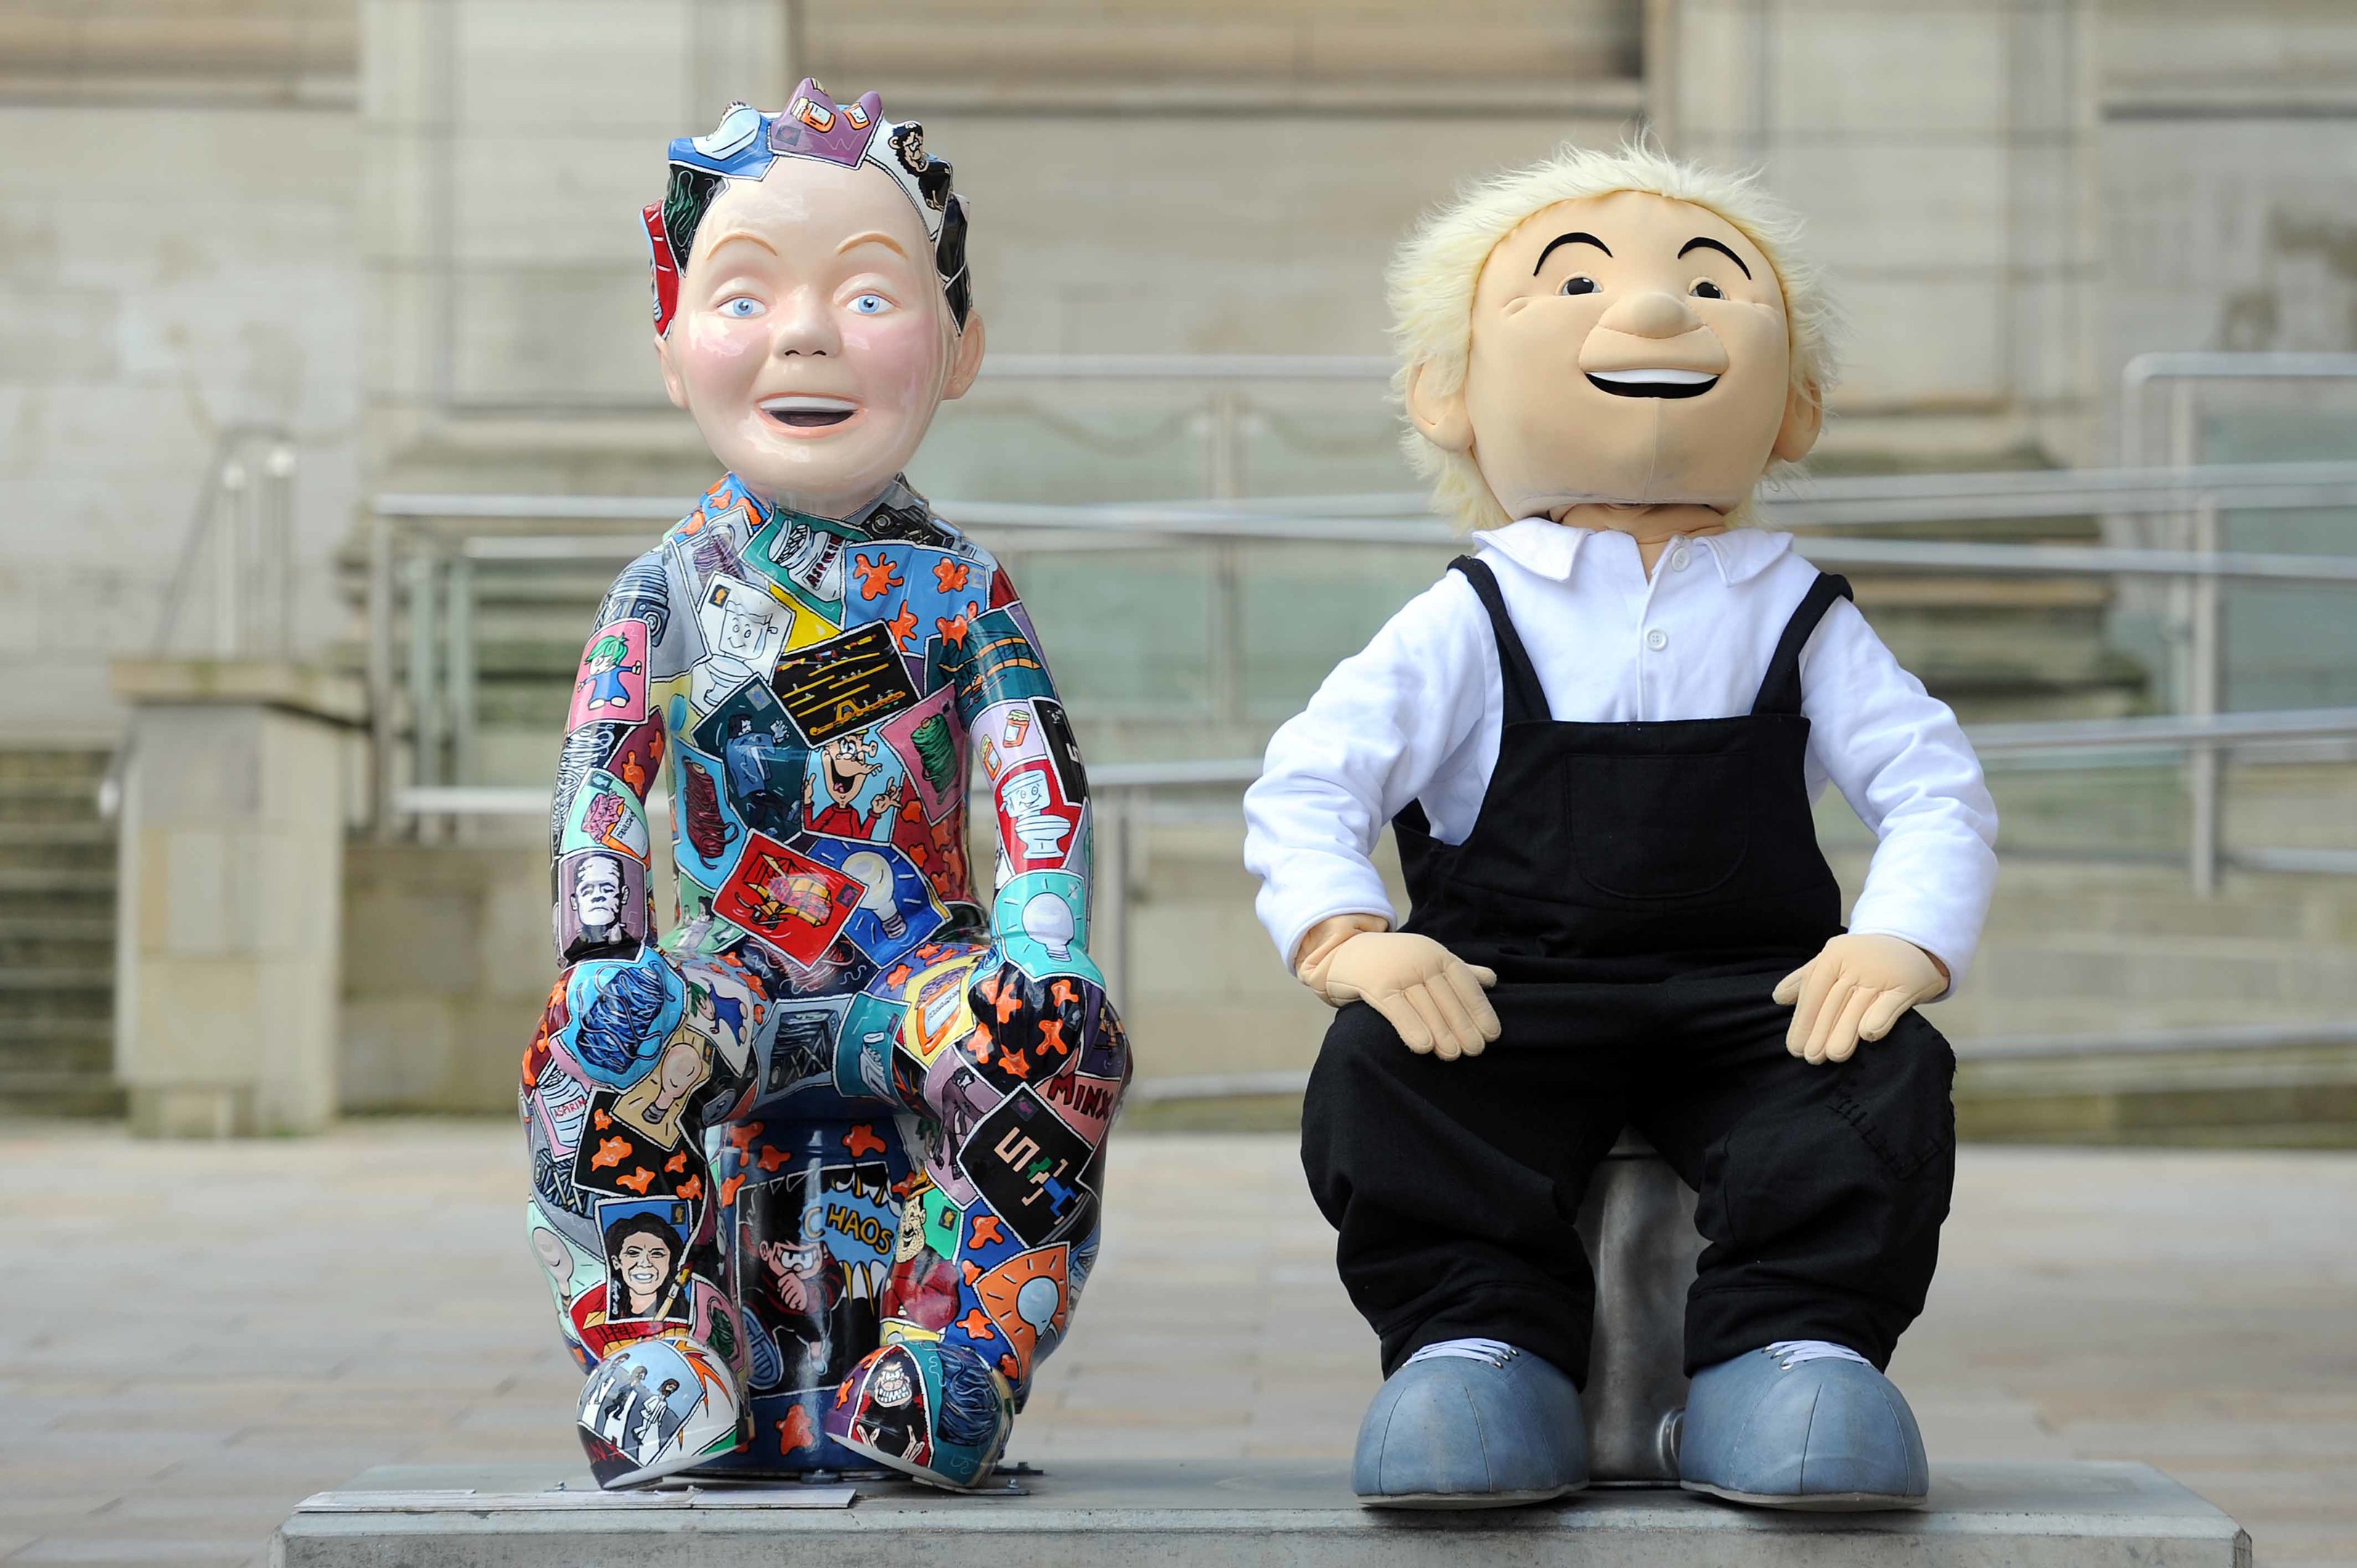 The Oor Wullie statues have now all been removed.